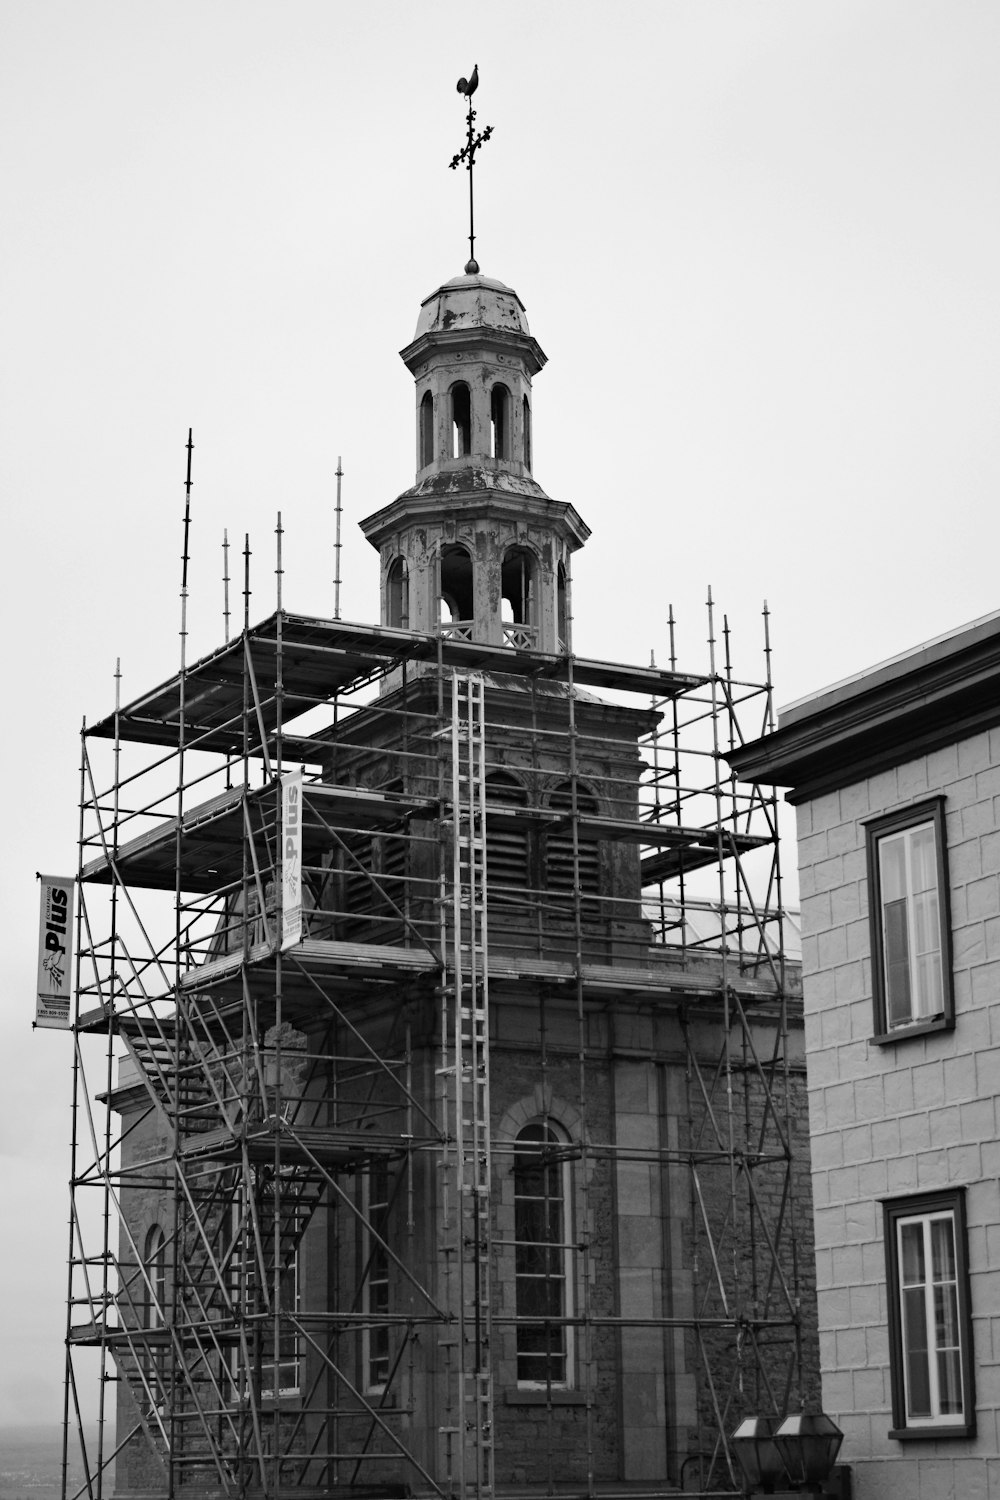 a building with scaffolding around it and a clock tower